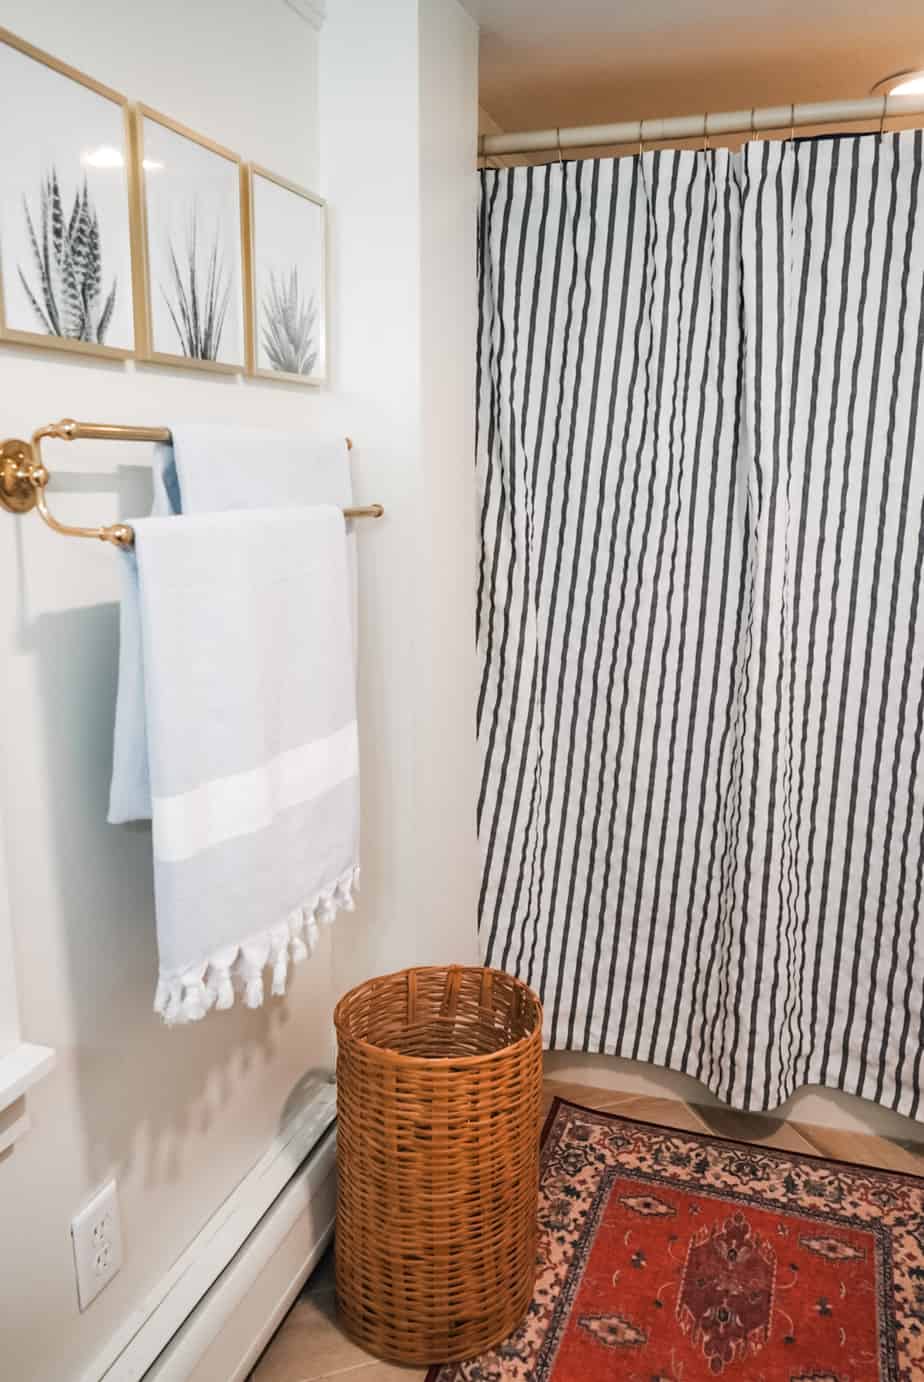 Blue and white shower curtain and towels, with three pictures on the wall and a wicker clothing hamper underneath the towel rack.